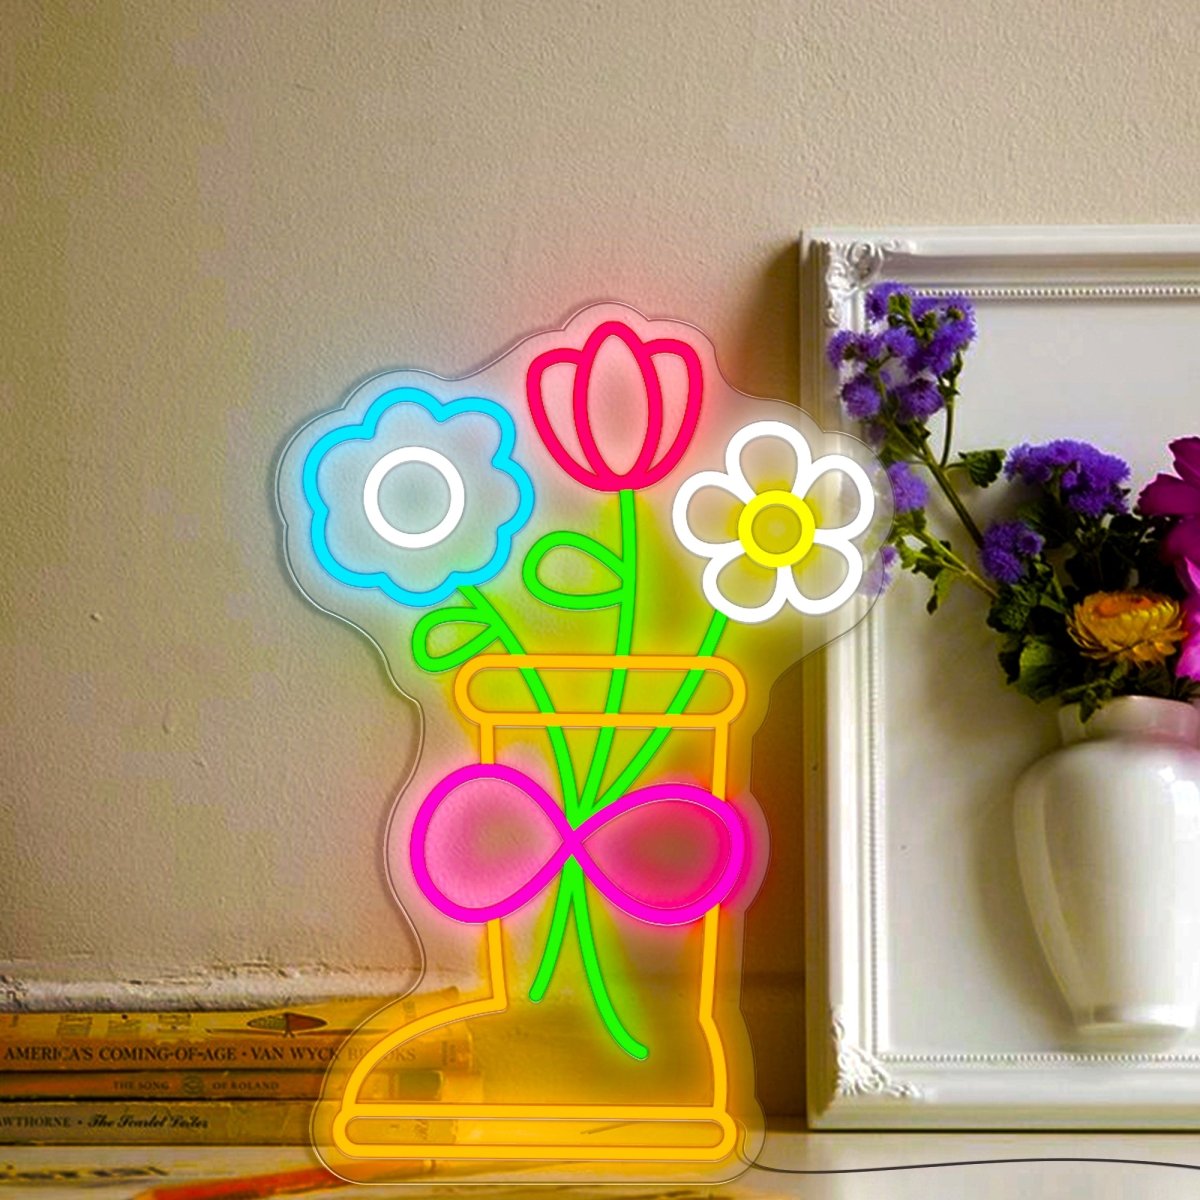 Blooming Boots Led Neon Sign - Reels Custom